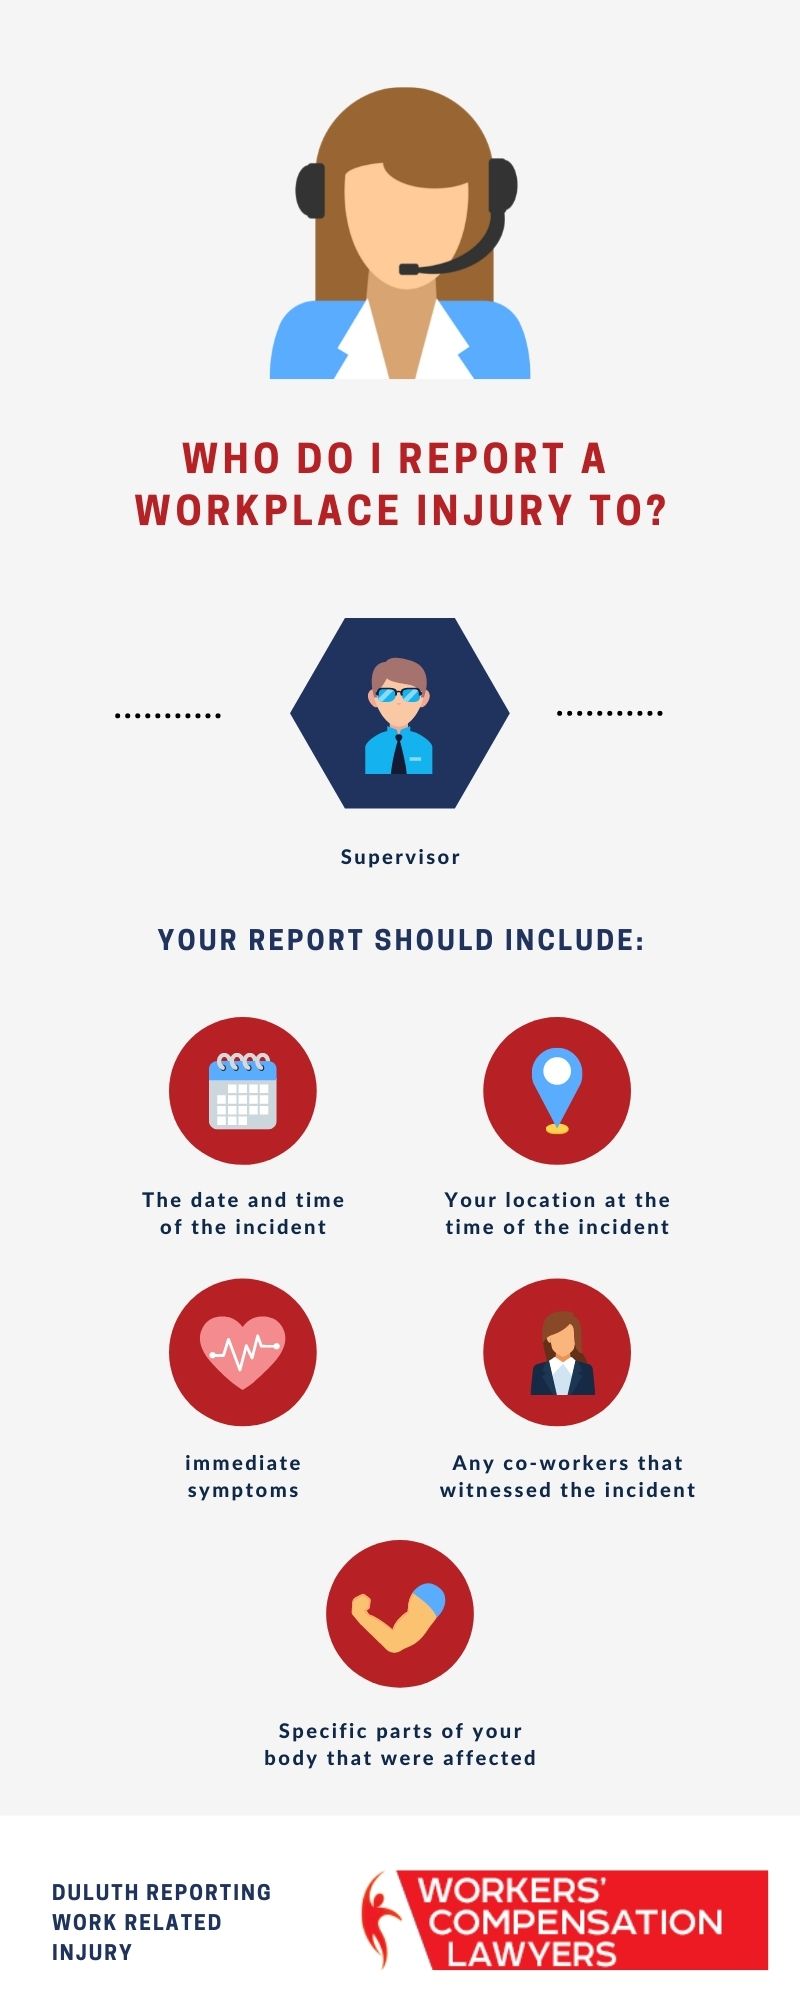 Duluth Reporting Work Related Injury Infographic